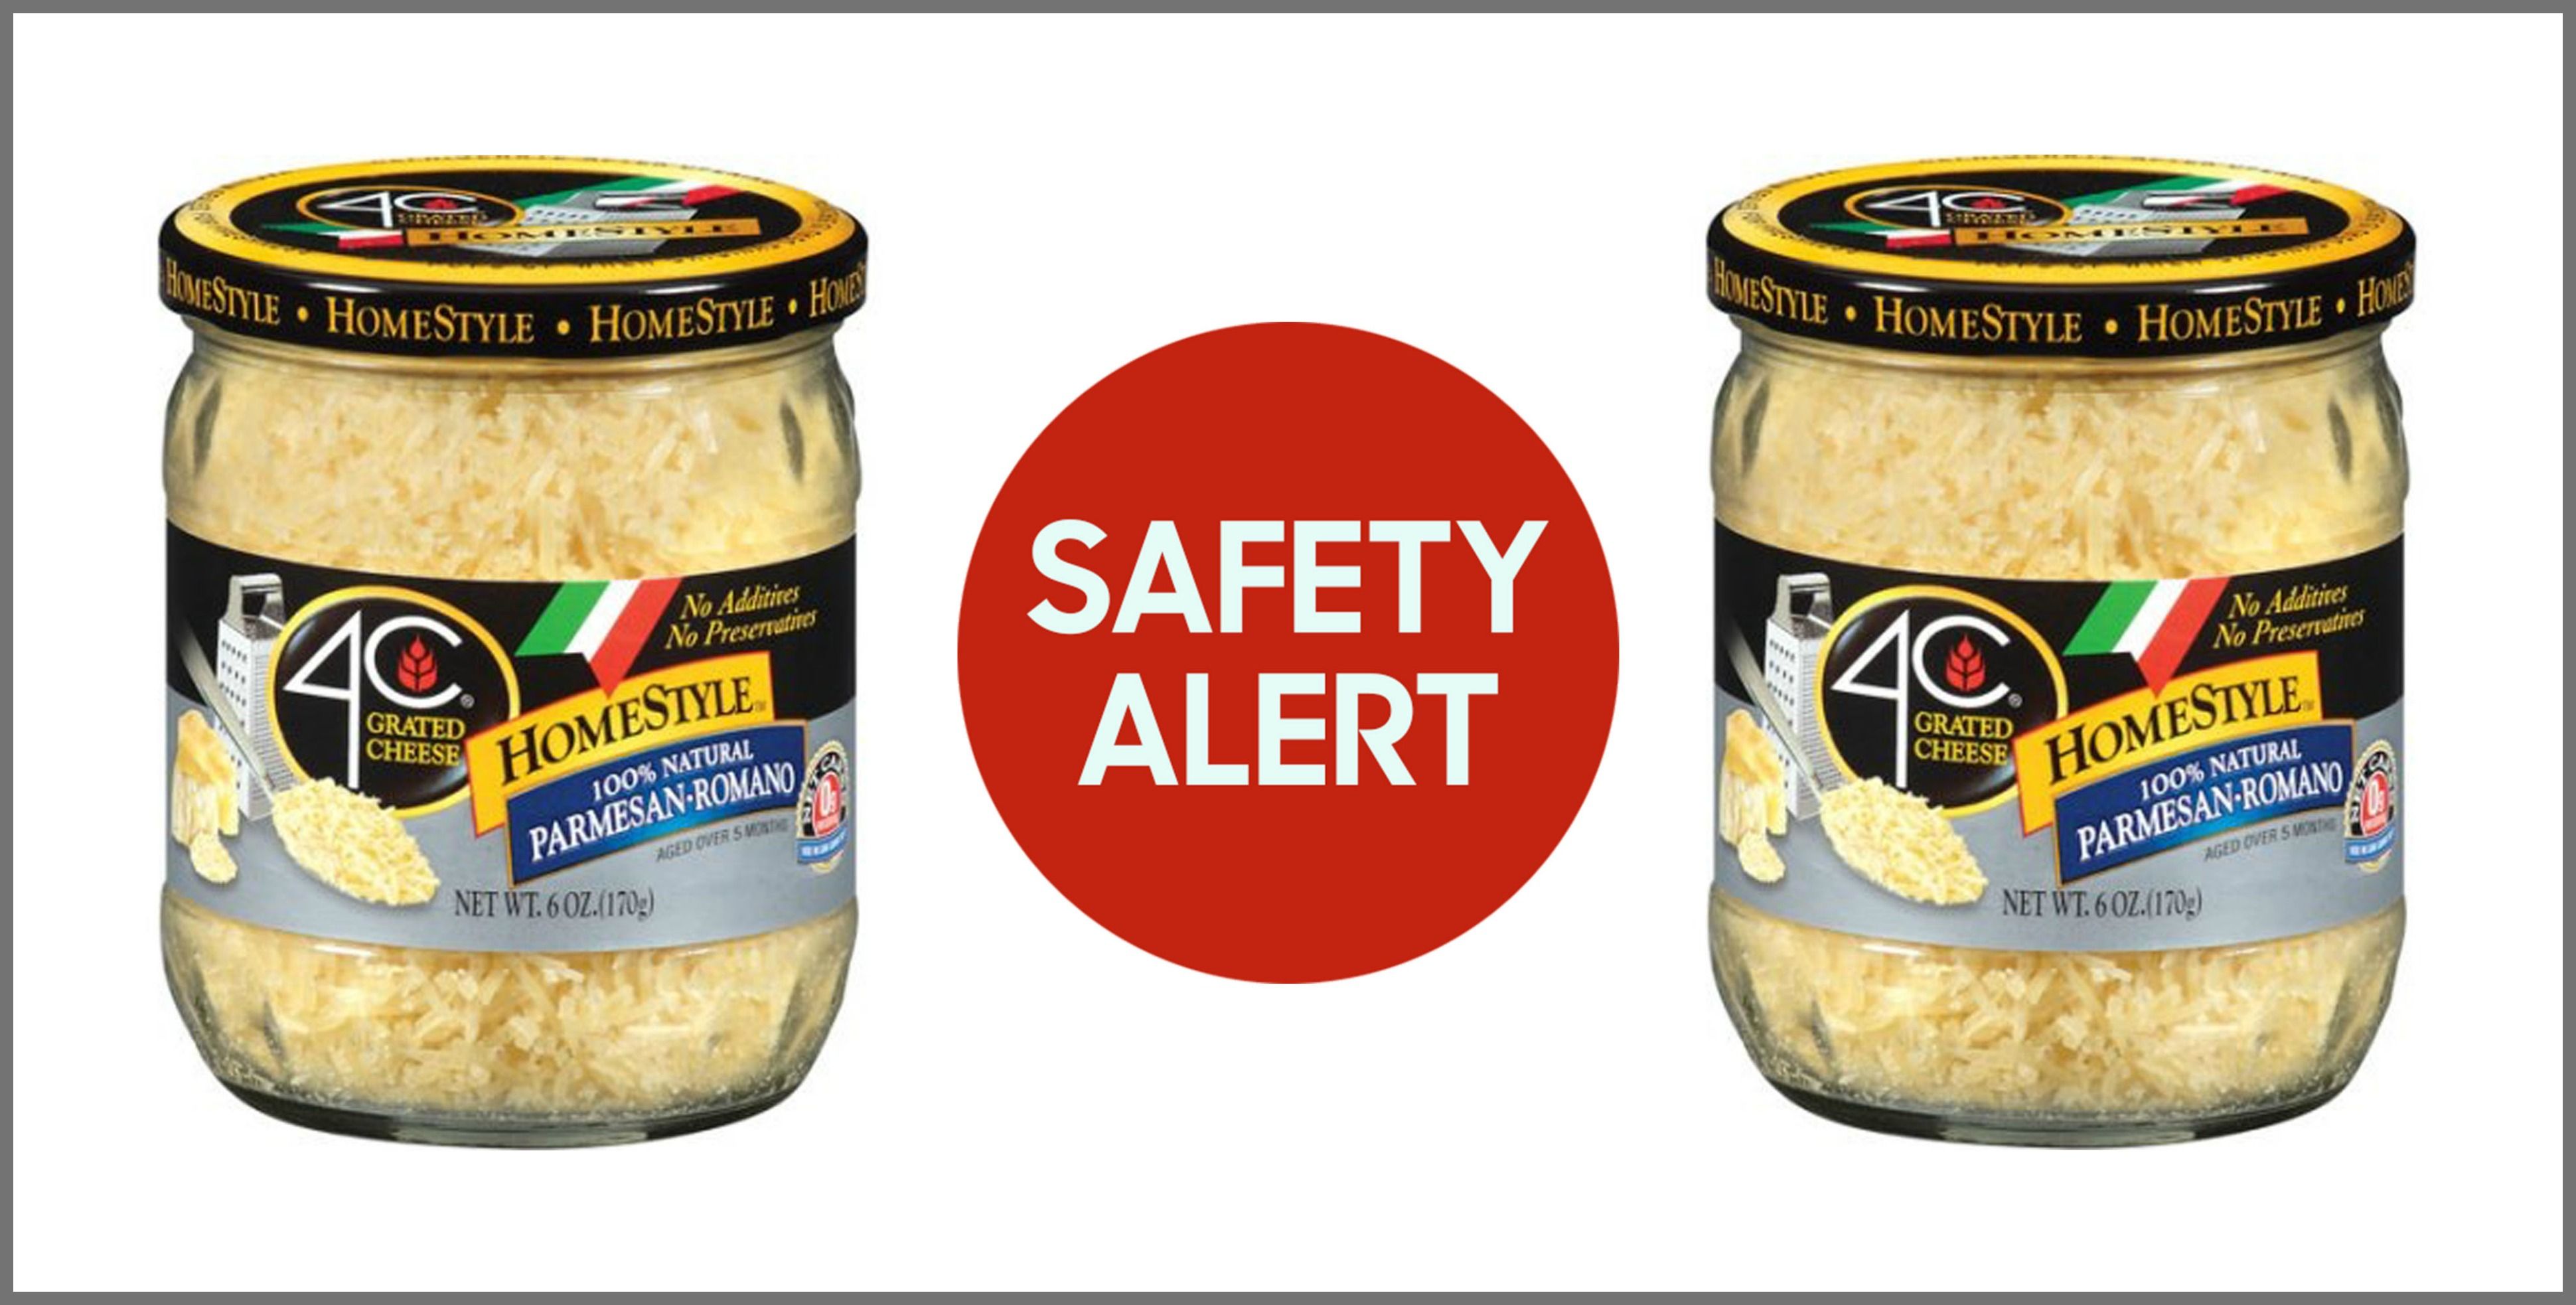 4c grated cheese recalled due to salmonella risk 4c grated cheese recall 4c grated cheese recalled due to